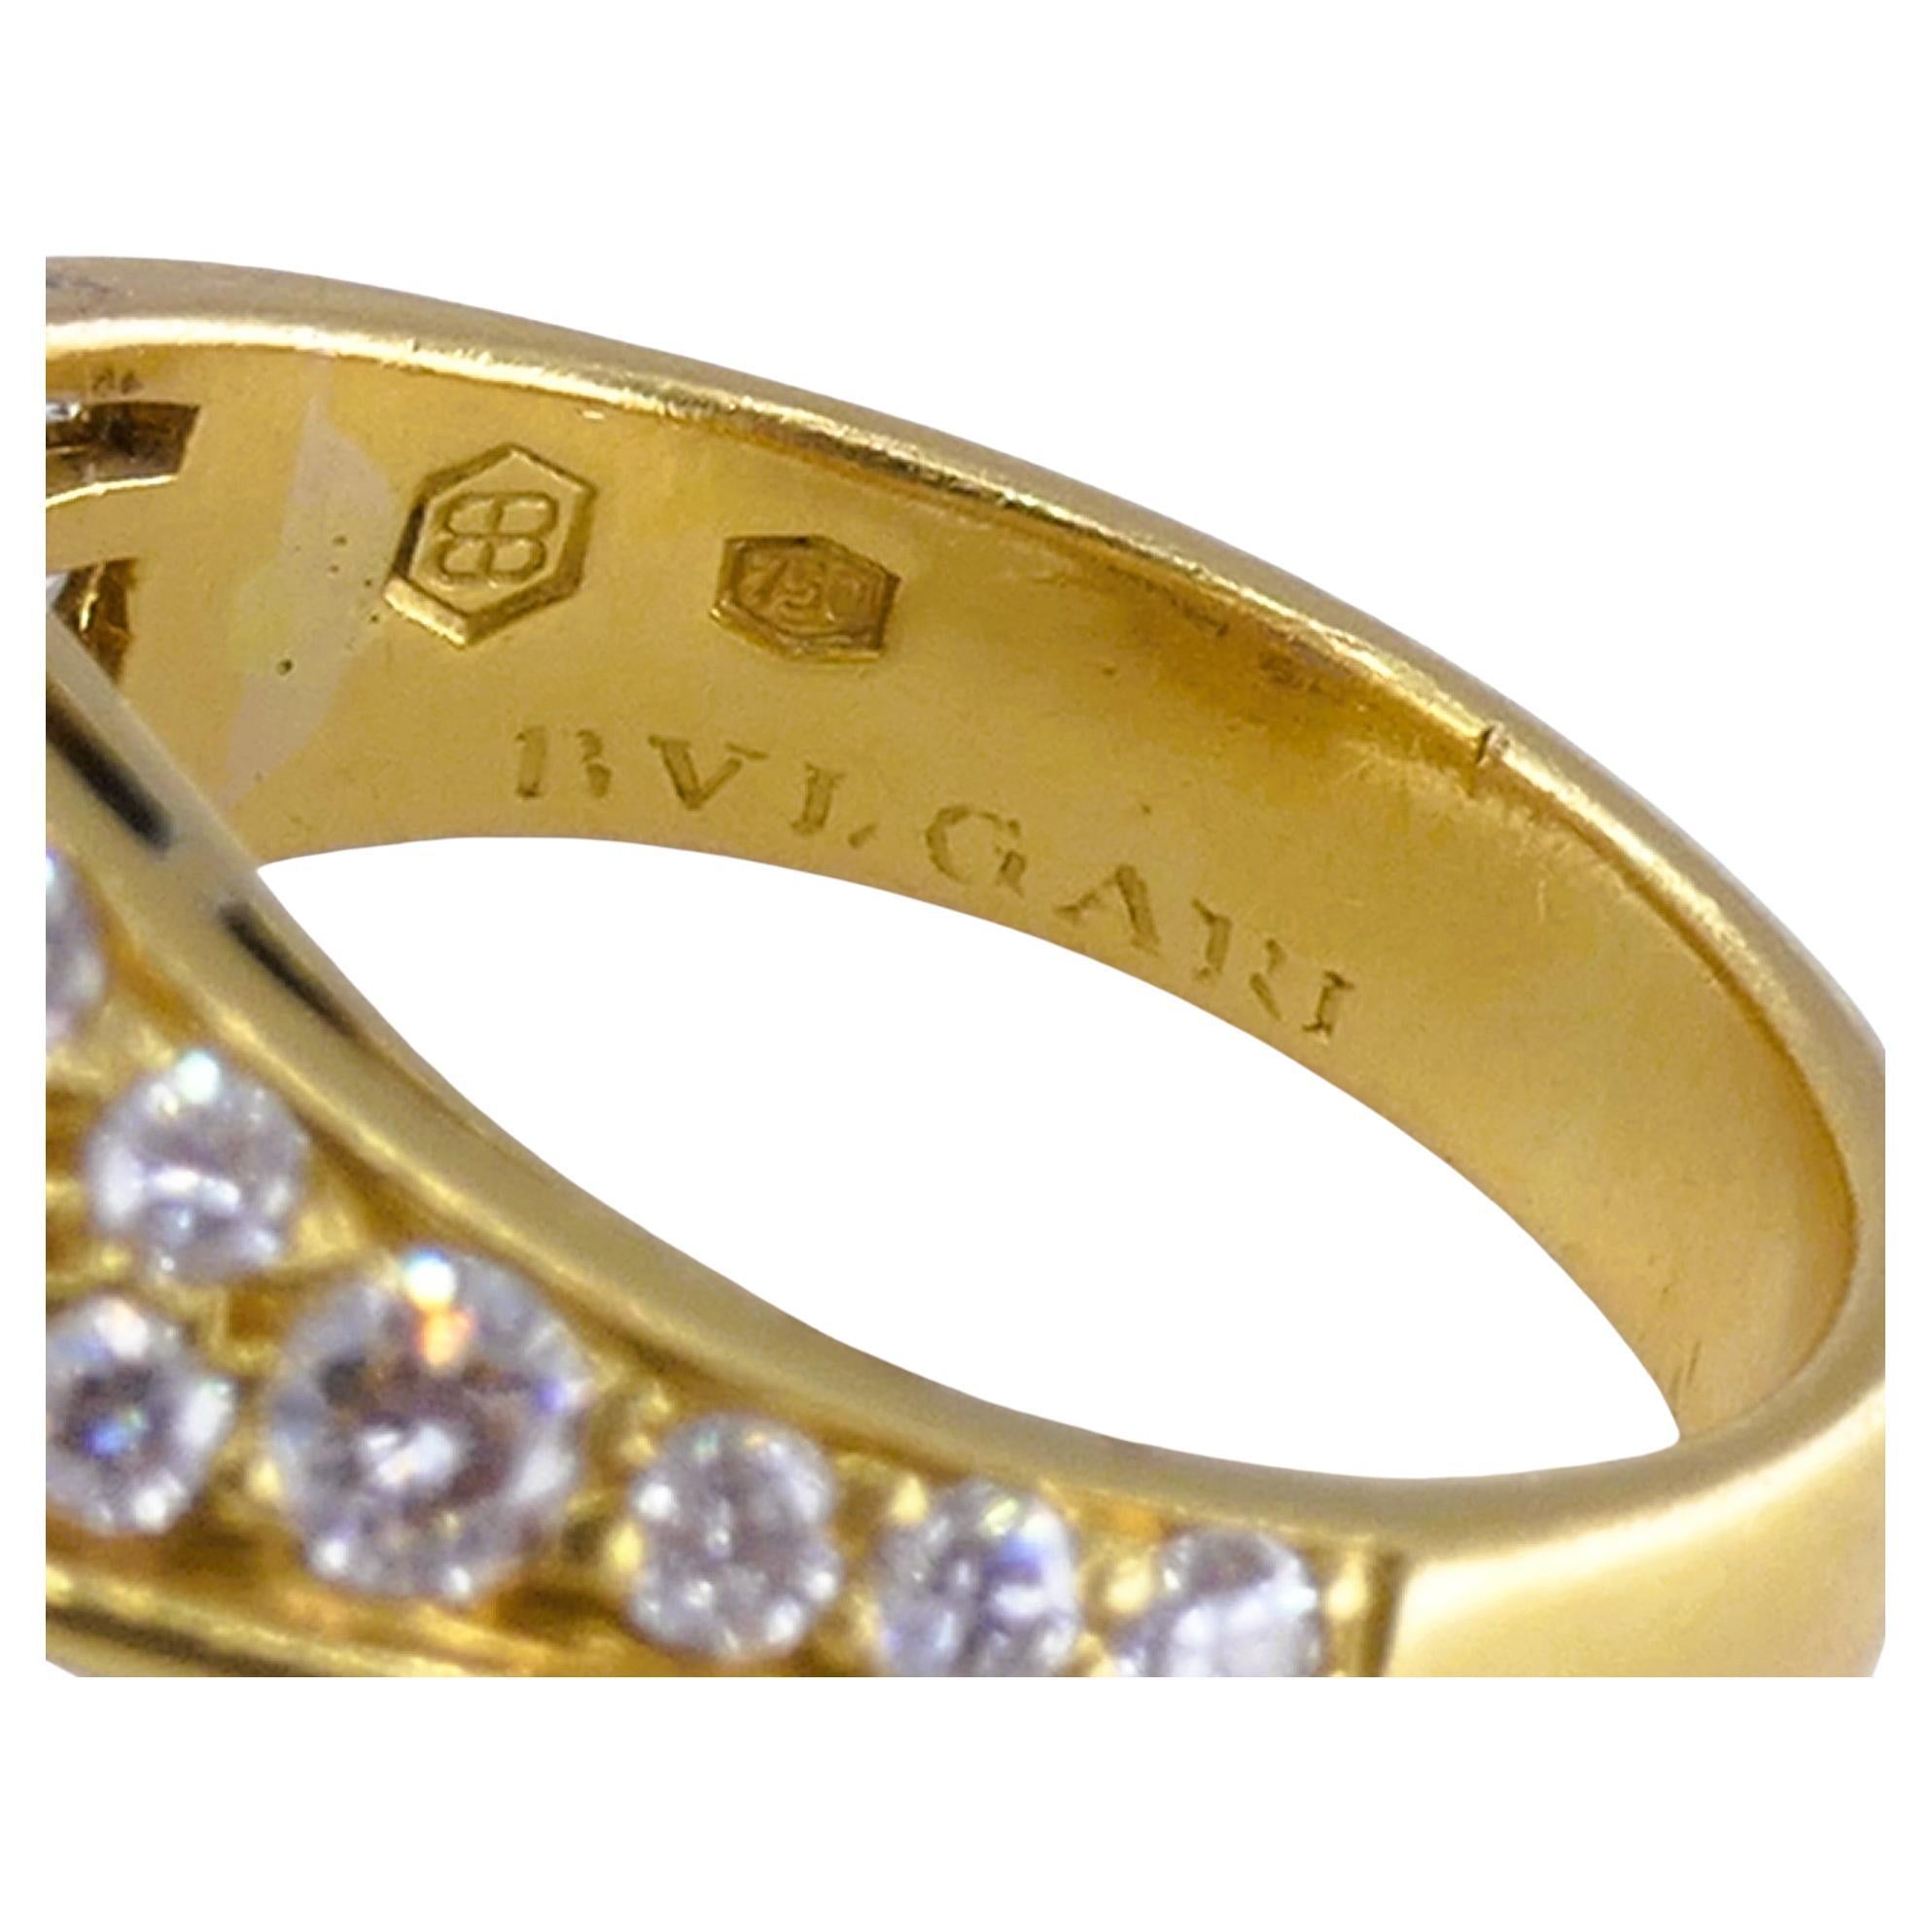 Vintage Bulgari Trombino Ring Sapphire Diamond Gold 18k Estate Jewelry In Good Condition For Sale In Beverly Hills, CA